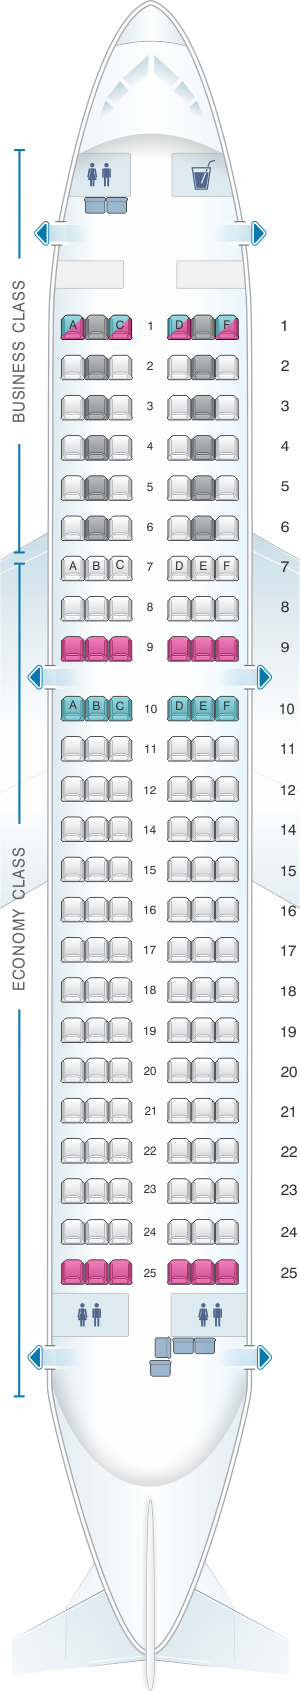 Seat map for Austrian Airlines Airbus A319